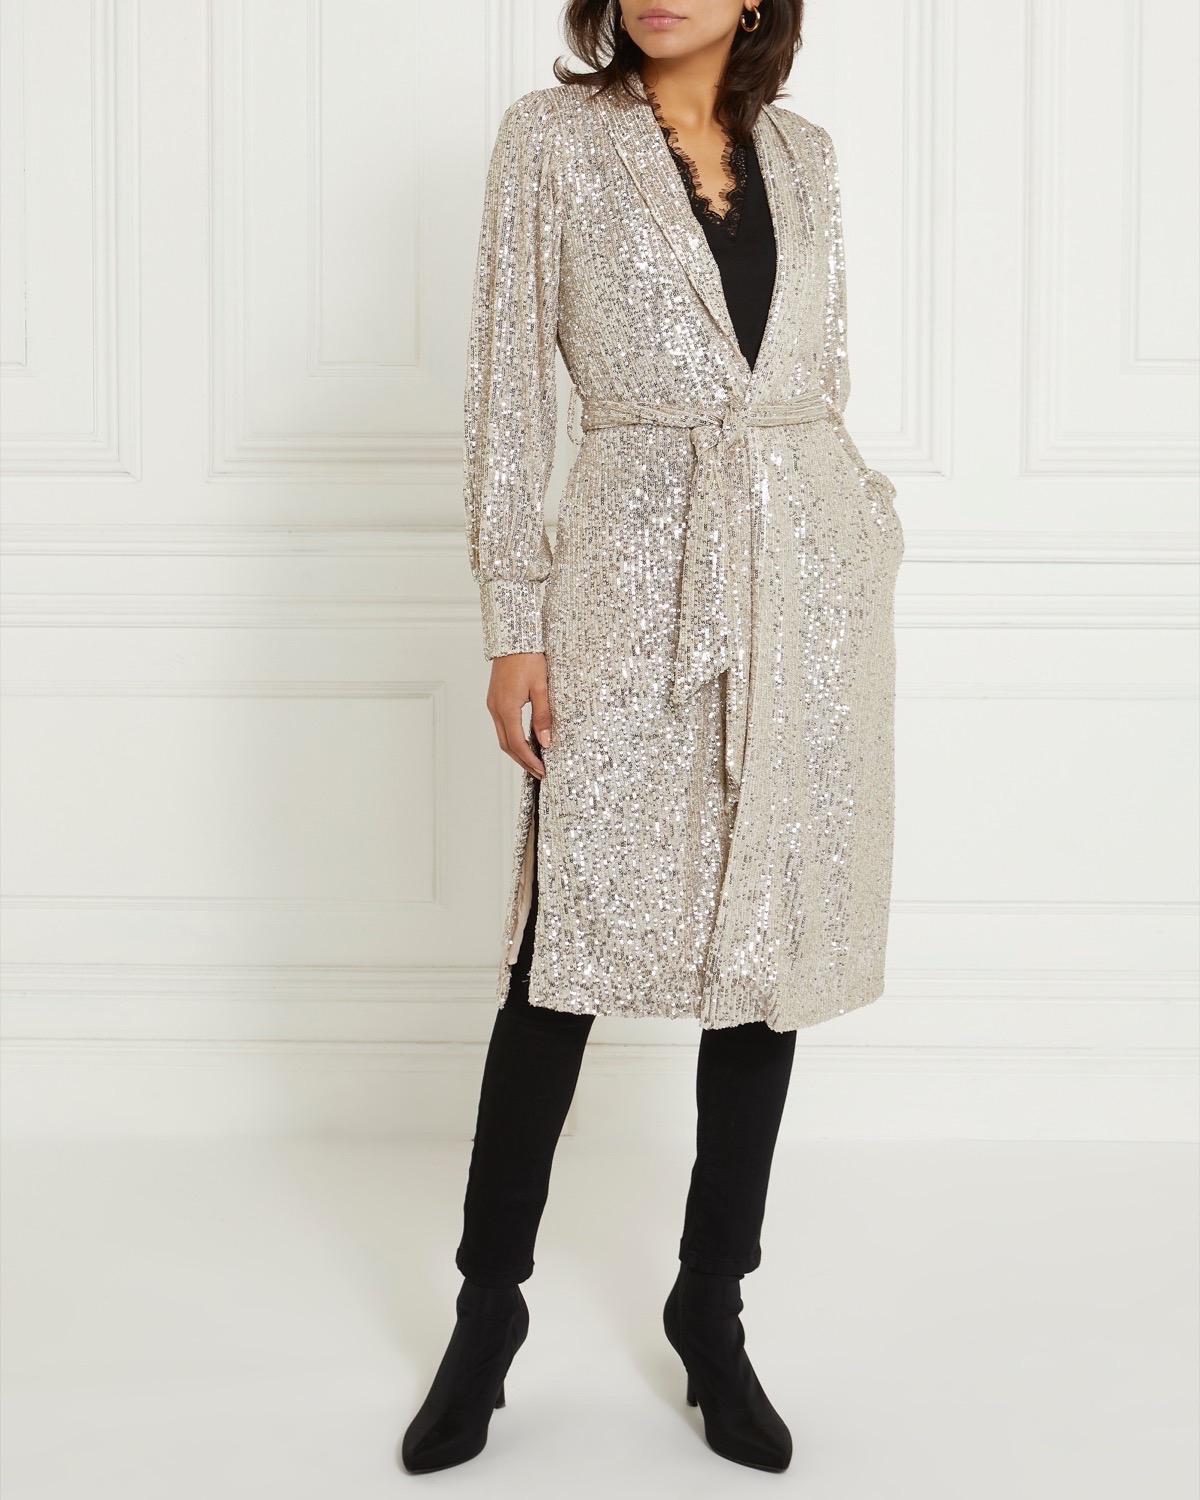 A fashion fan is raving about this 'stunning' Dunnes Stores sequin duster  coat - Dublin's FM104